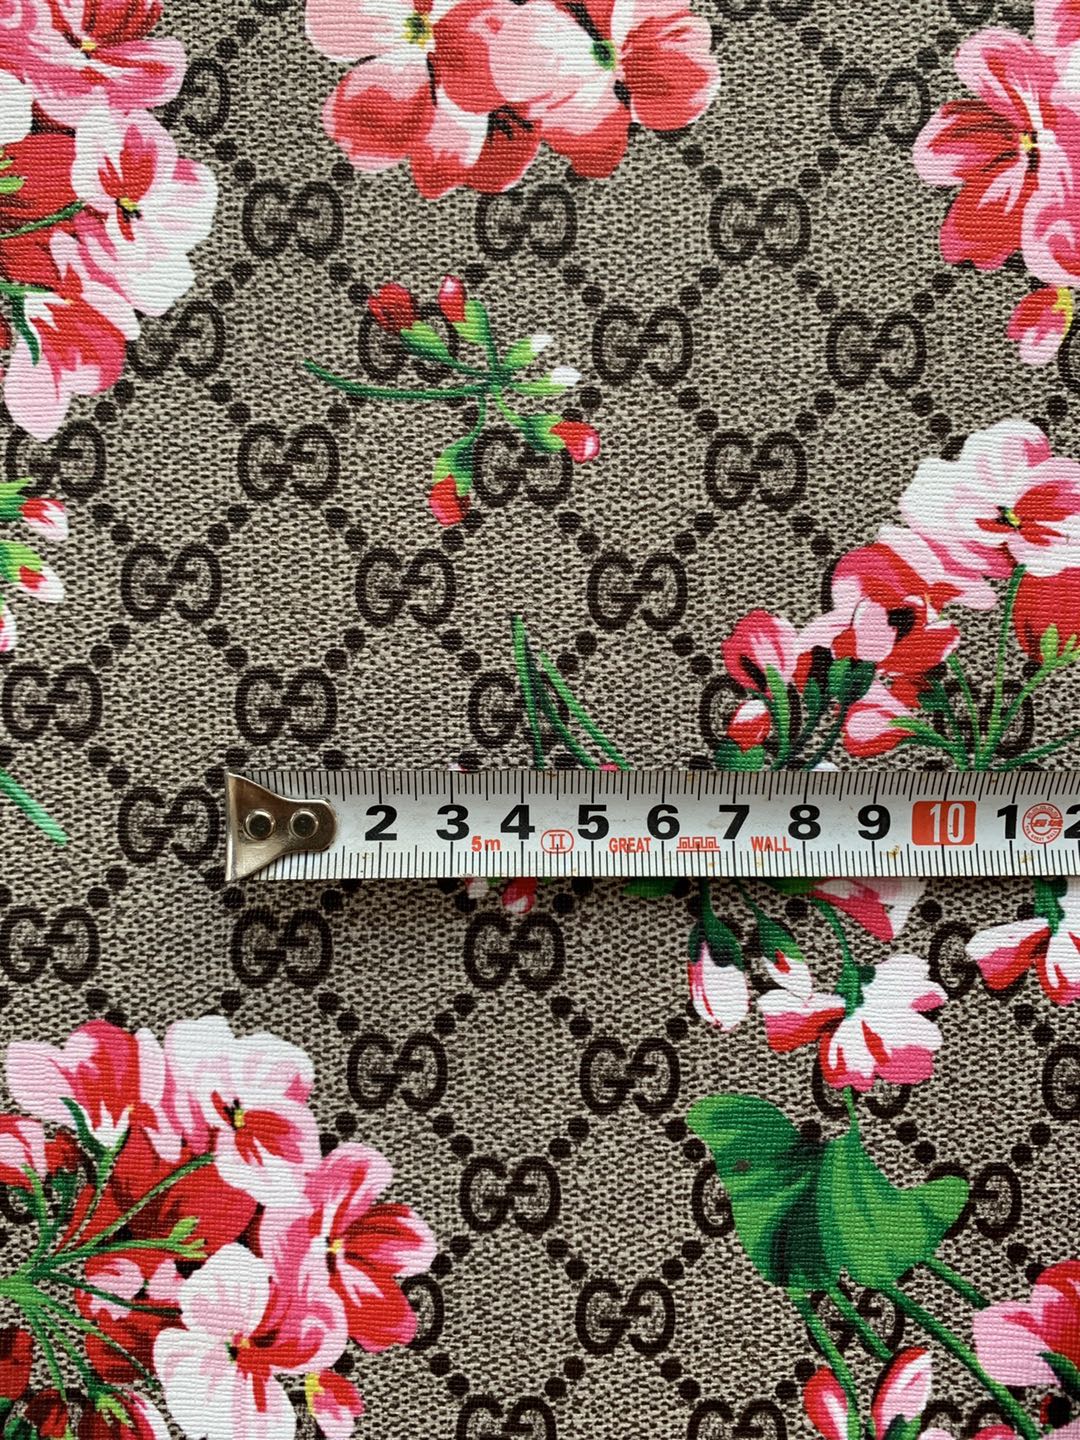 Gucci In Flowers